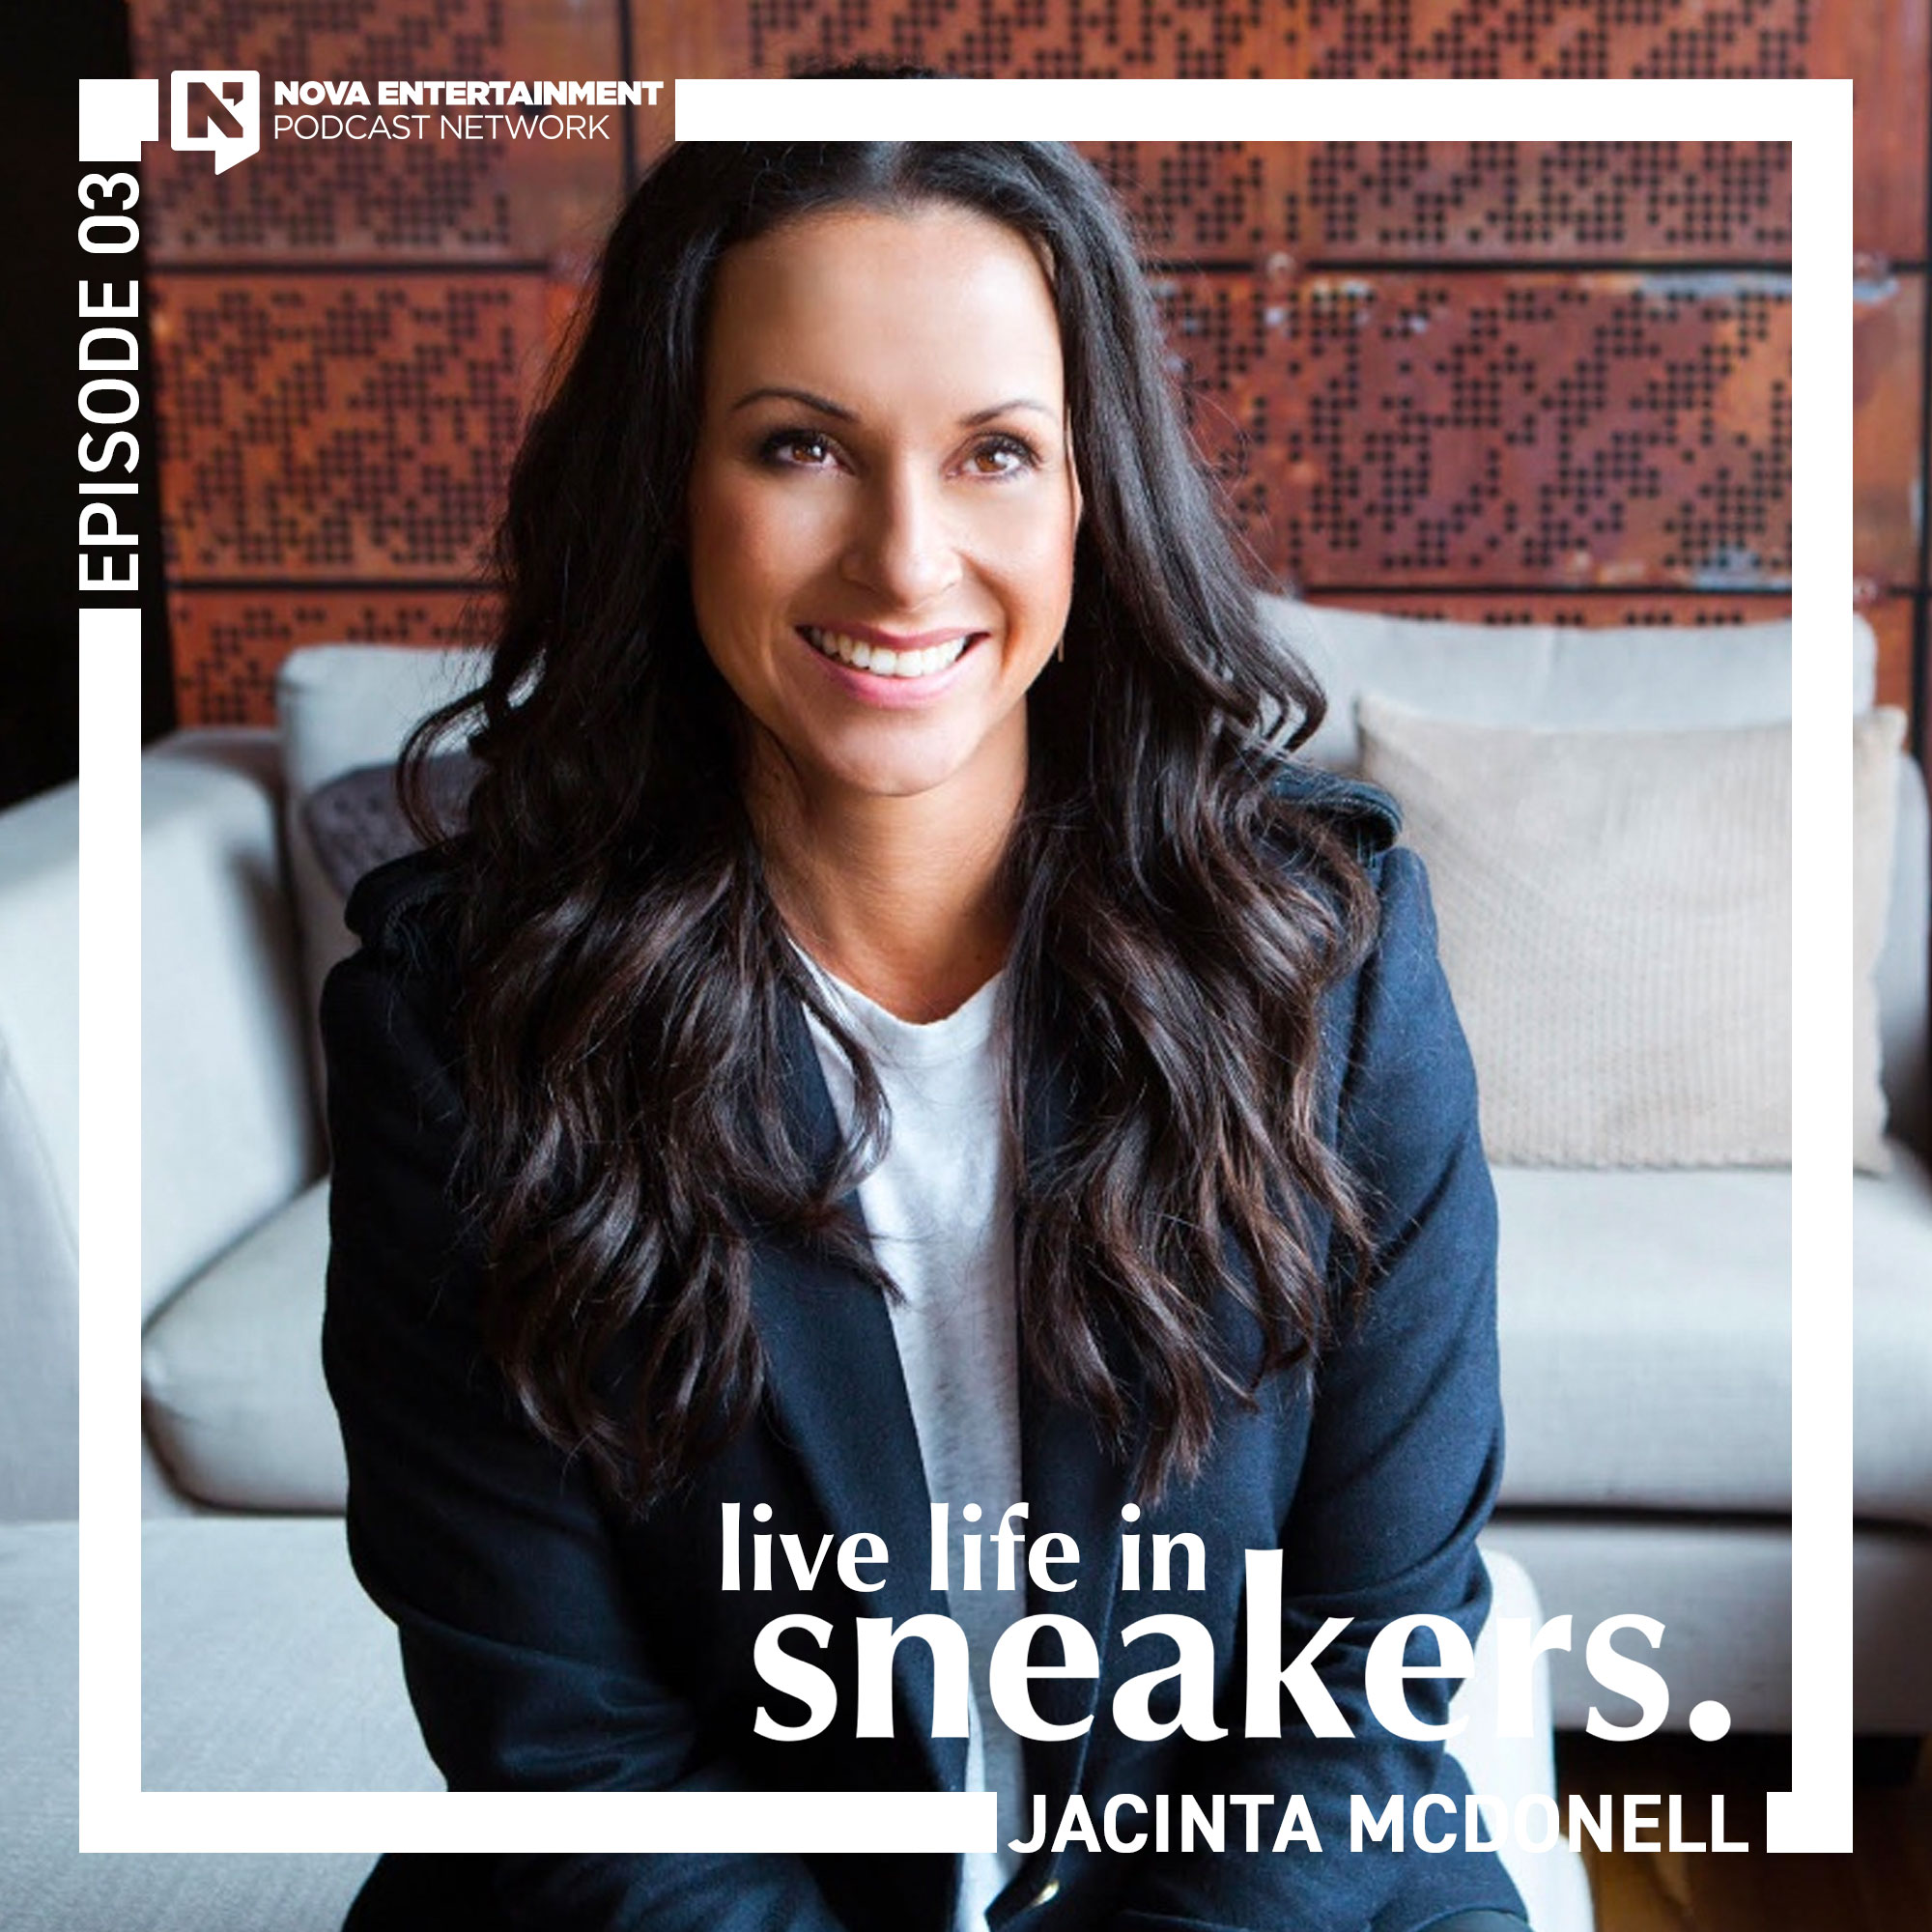 Jacinta McDonell on the business of fitness, and finding your passion